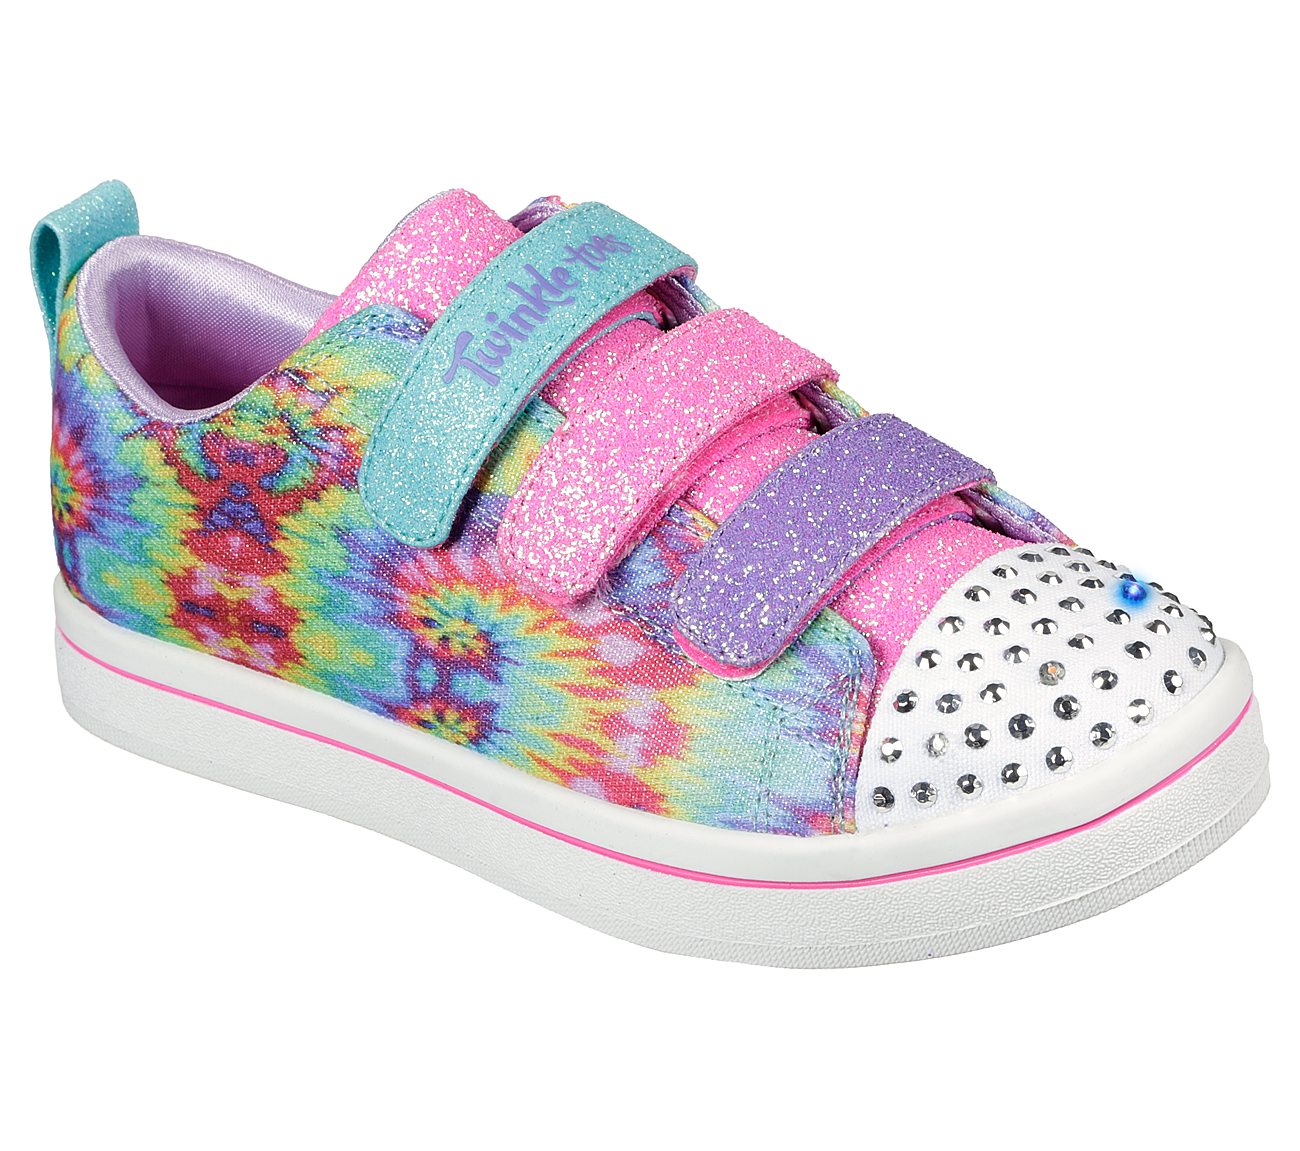 Buy SKECHERS Twinkle Toes: Sparkle Rayz S-Lights Shoes